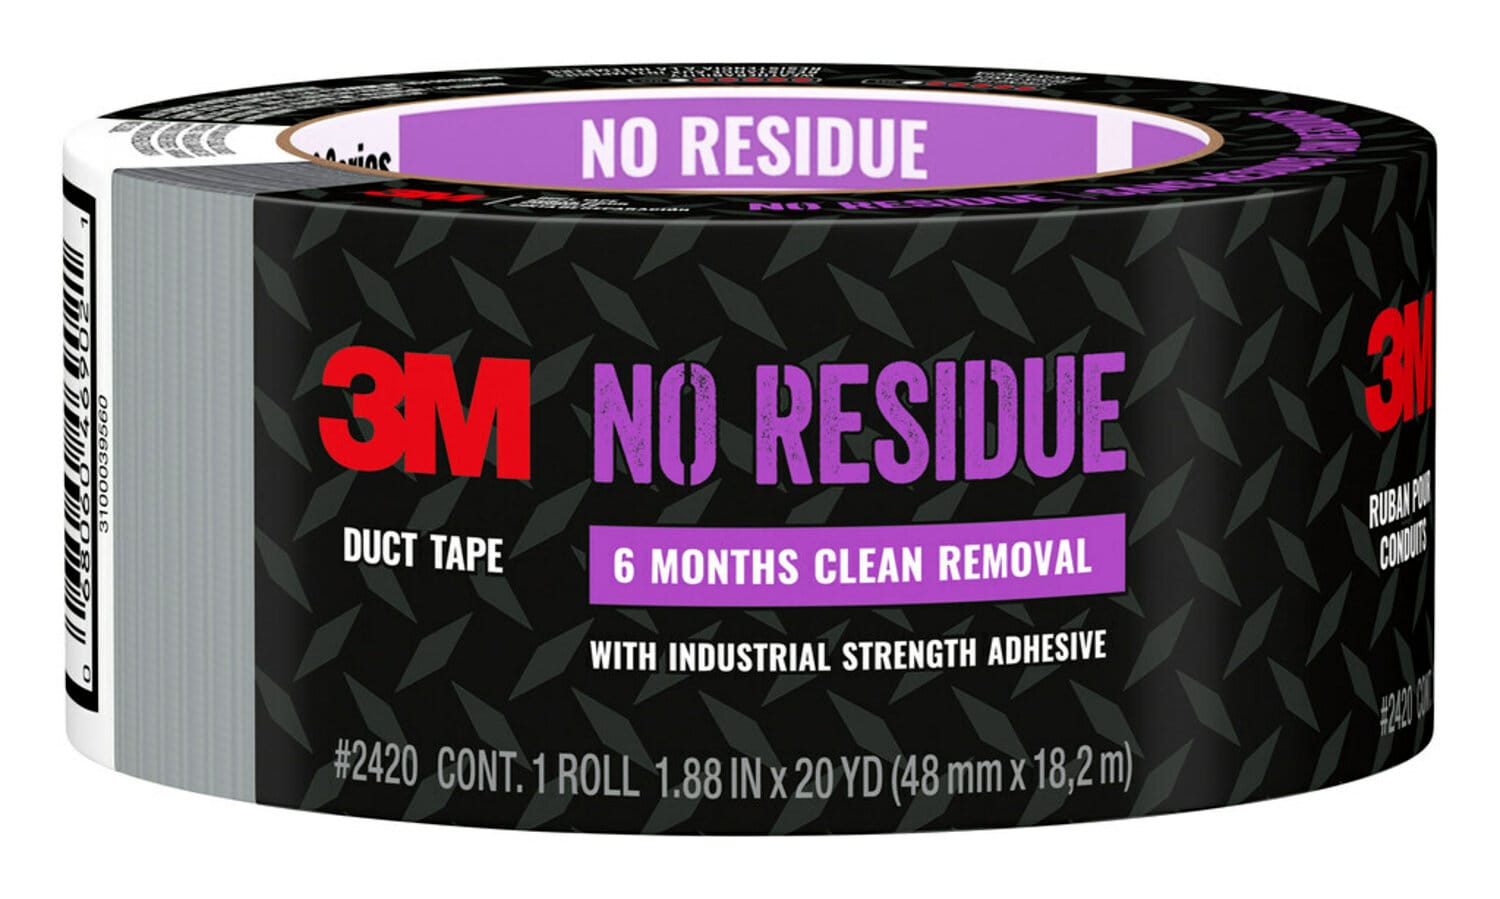 7100270251 - 3M No Residue Duct Tape 2420, 1.88 in x 20 yd (48 mm x 18.2 m)